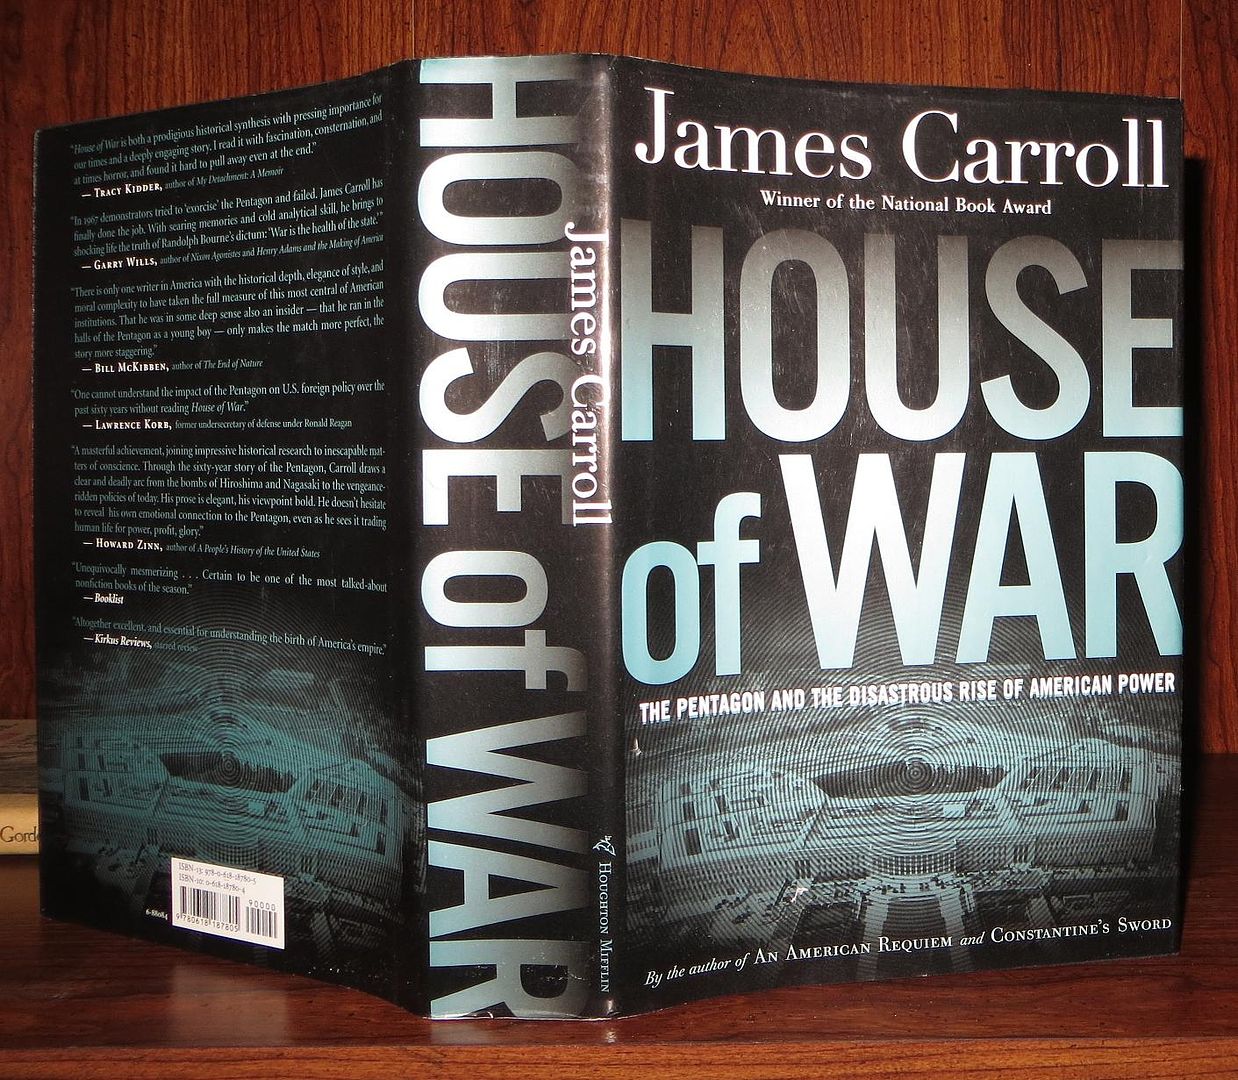 CARROLL, JAMES - House of War the Pentagon and the Disastrous Rise of American Power